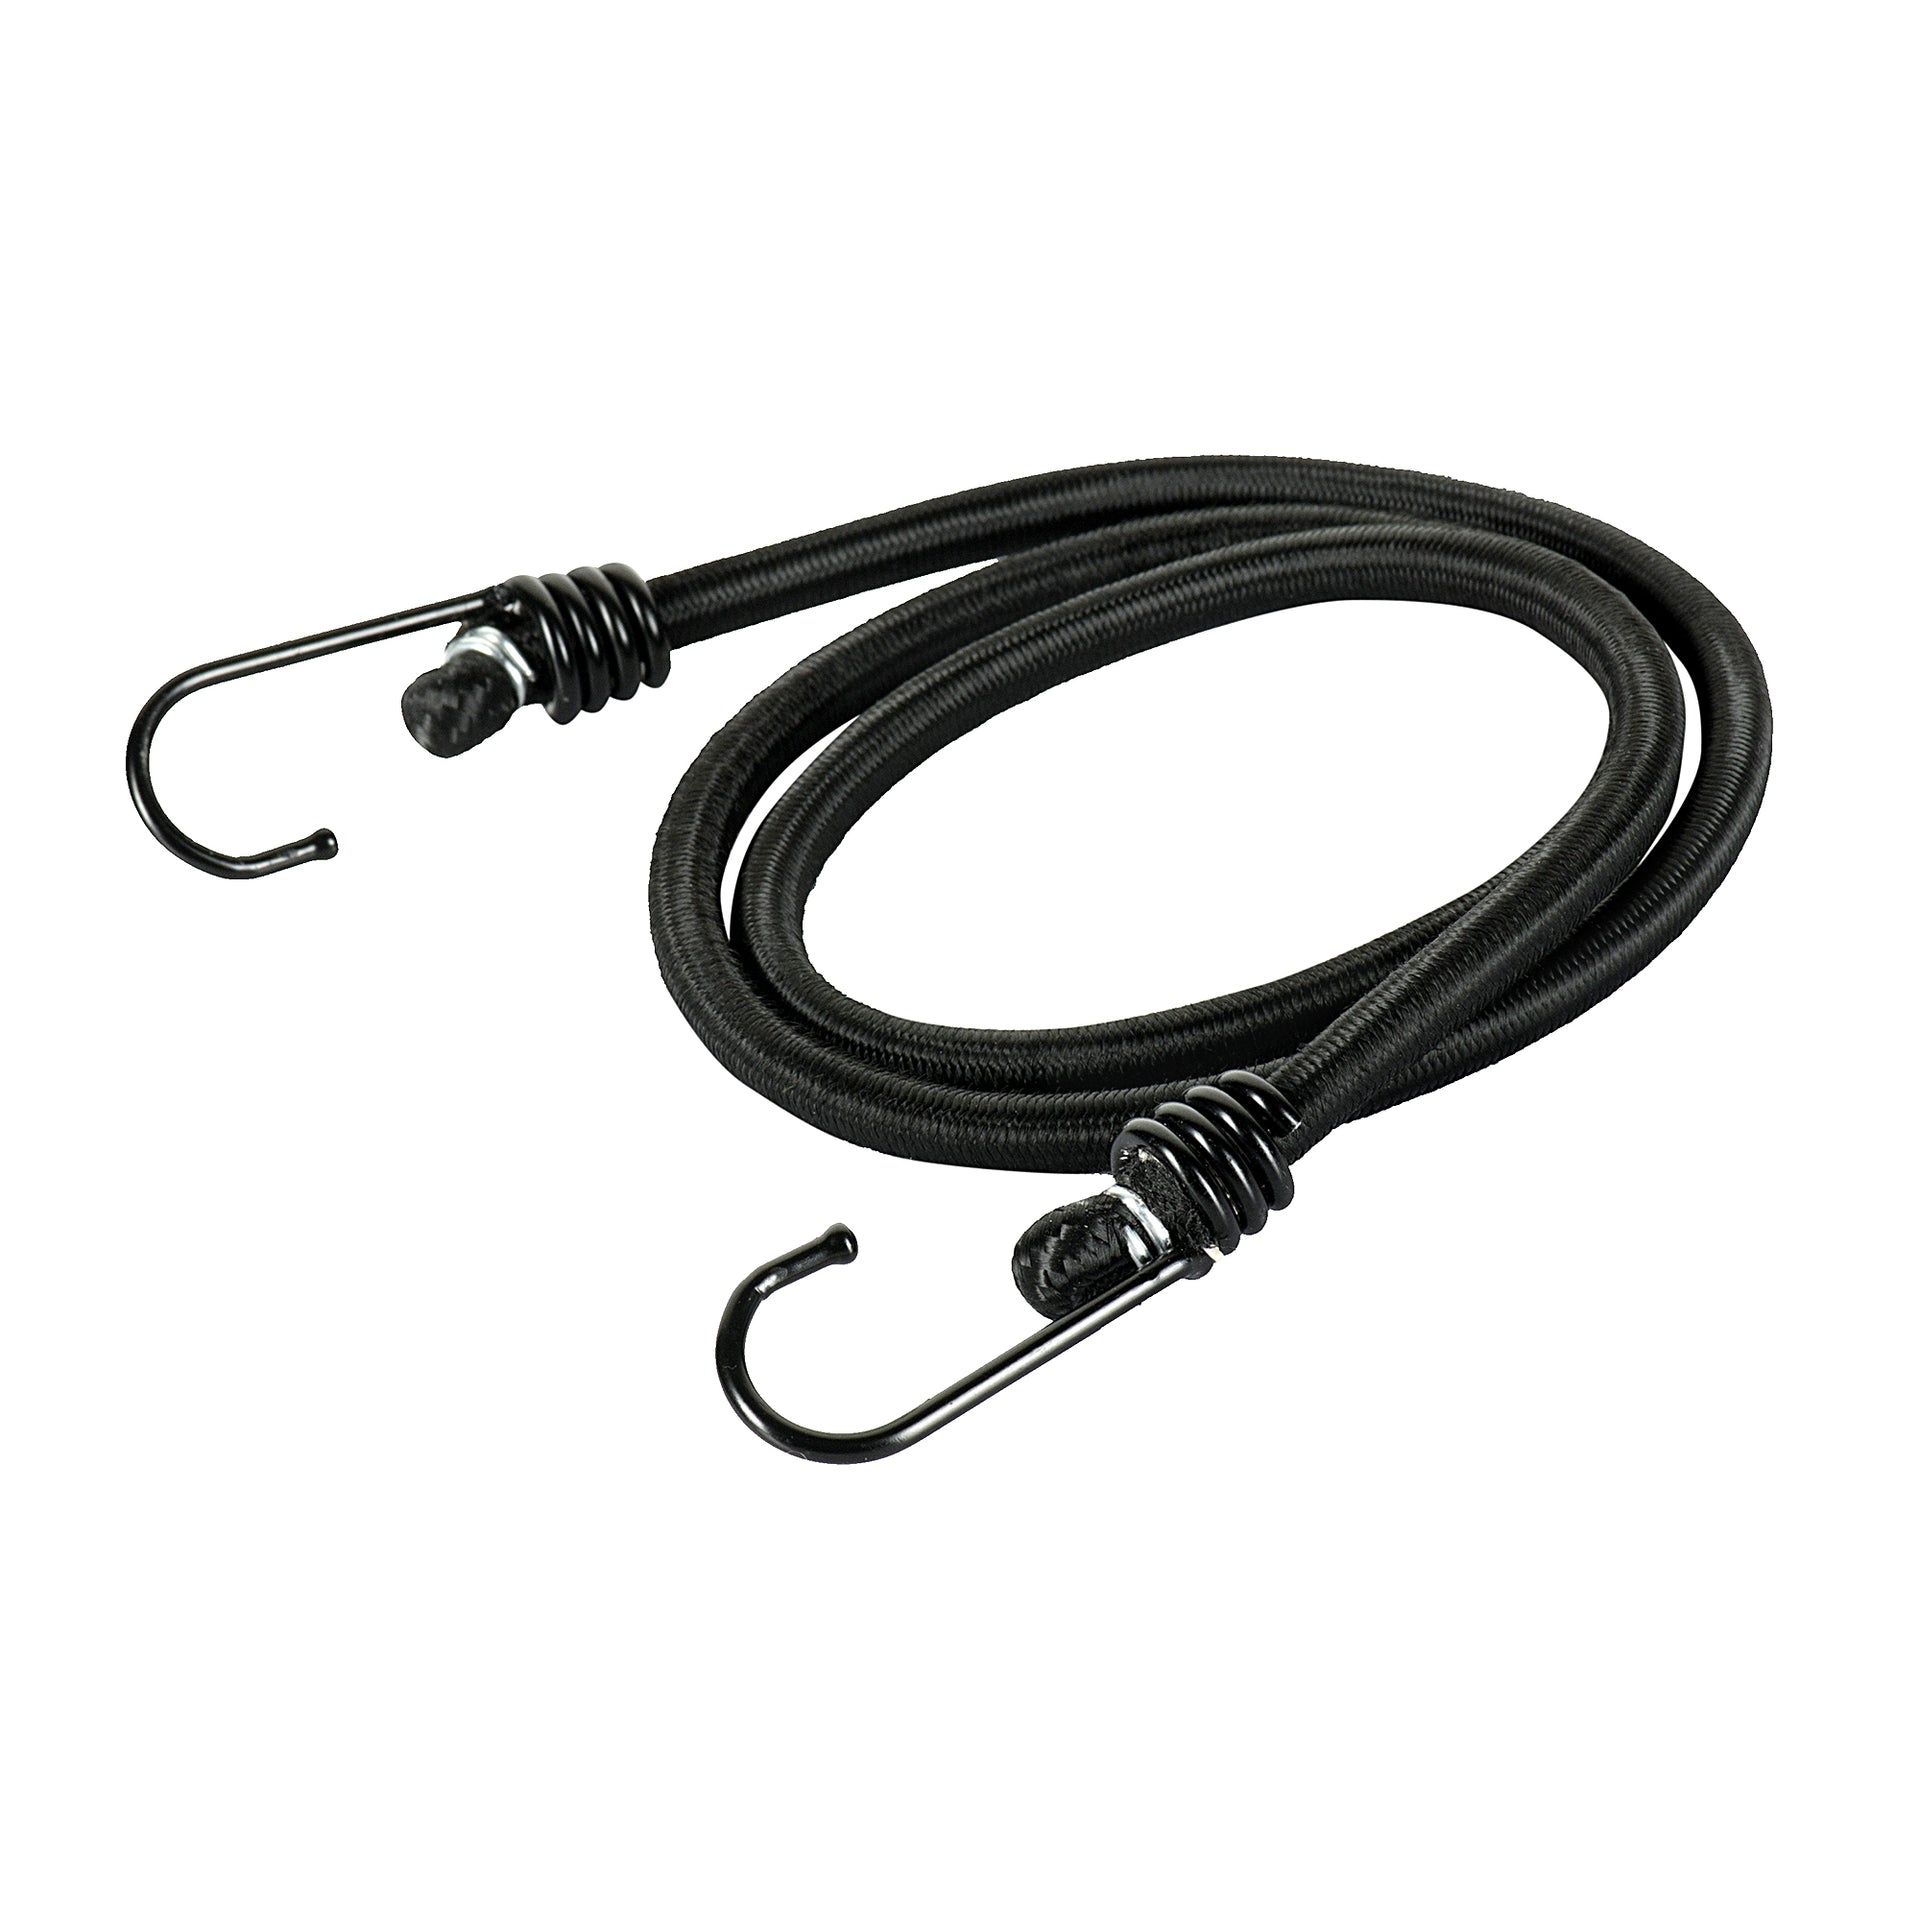 Bungee Cord (Bicycle Hook) #066  SoldierTalk (Military Products